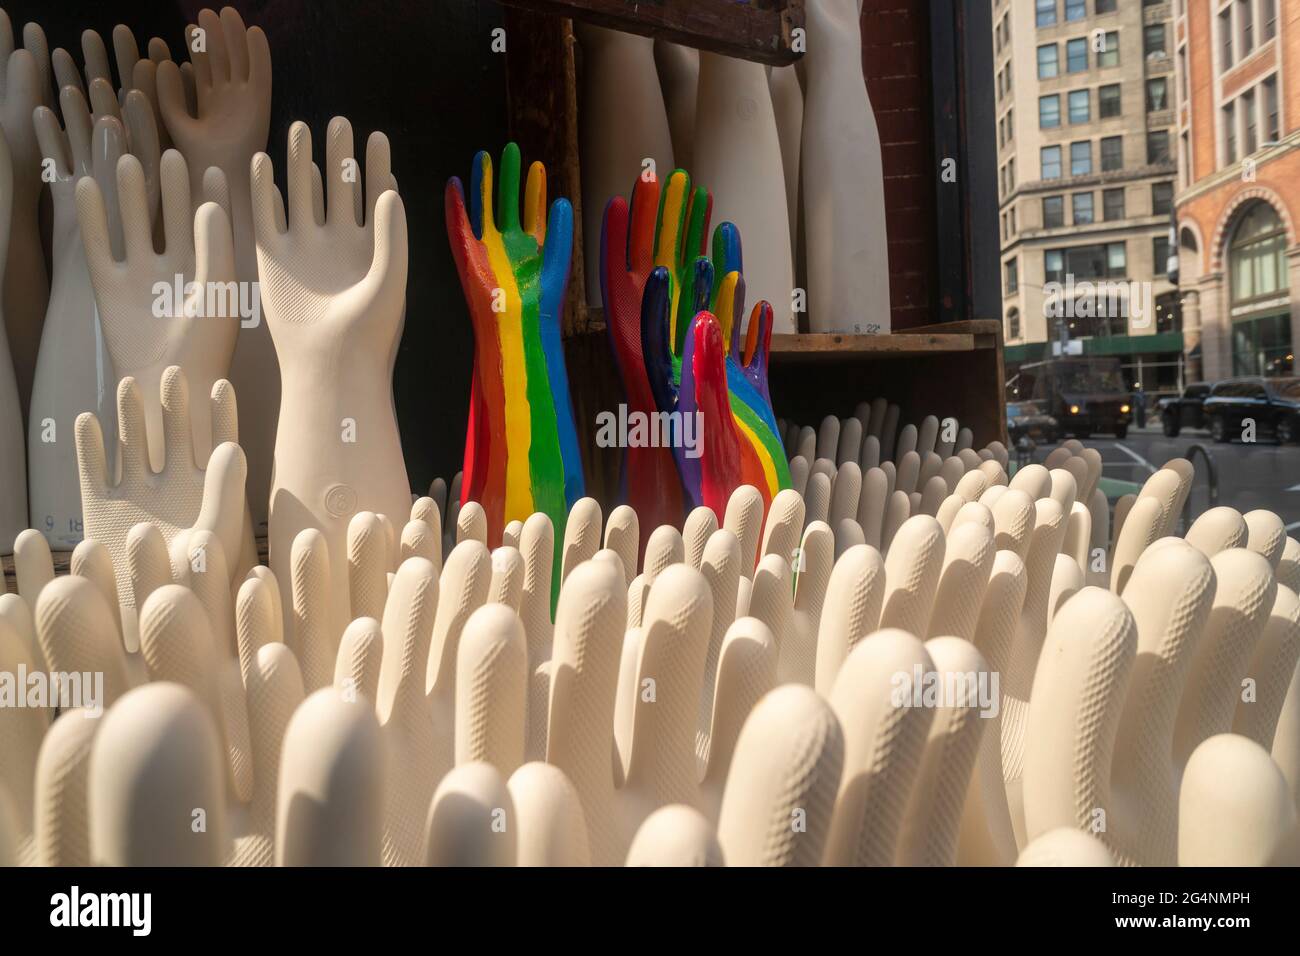 https://c8.alamy.com/comp/2G4NMPH/gay-pride-display-in-the-window-of-fishs-eddy-home-goods-store-in-the-flatiron-neighborhood-of-new-york-on-monday-june-21-2021-richard-b-levine-2G4NMPH.jpg